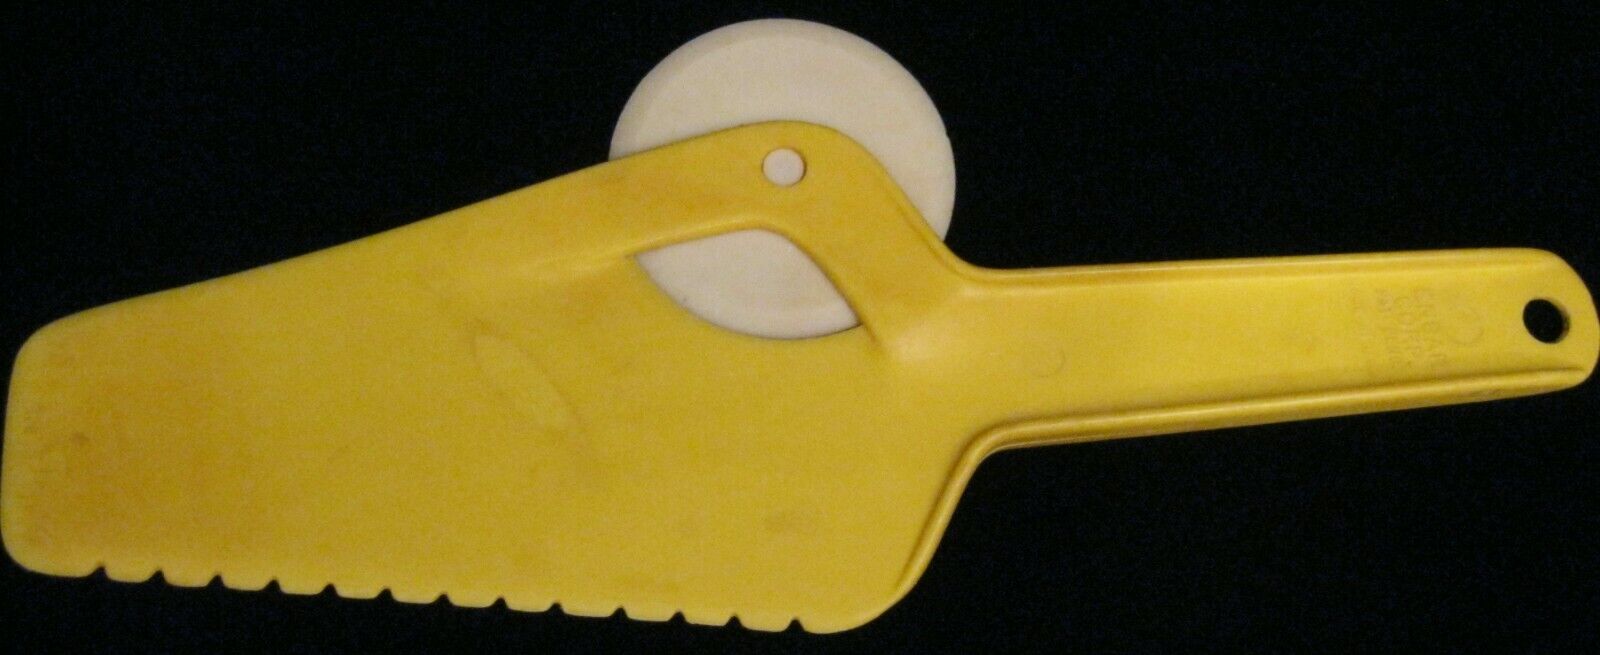 VINTAGE ENSAR PIZZA CUTTER AND SERVER YELLOW WITH SERRATED PLASTIC BLADE RARE